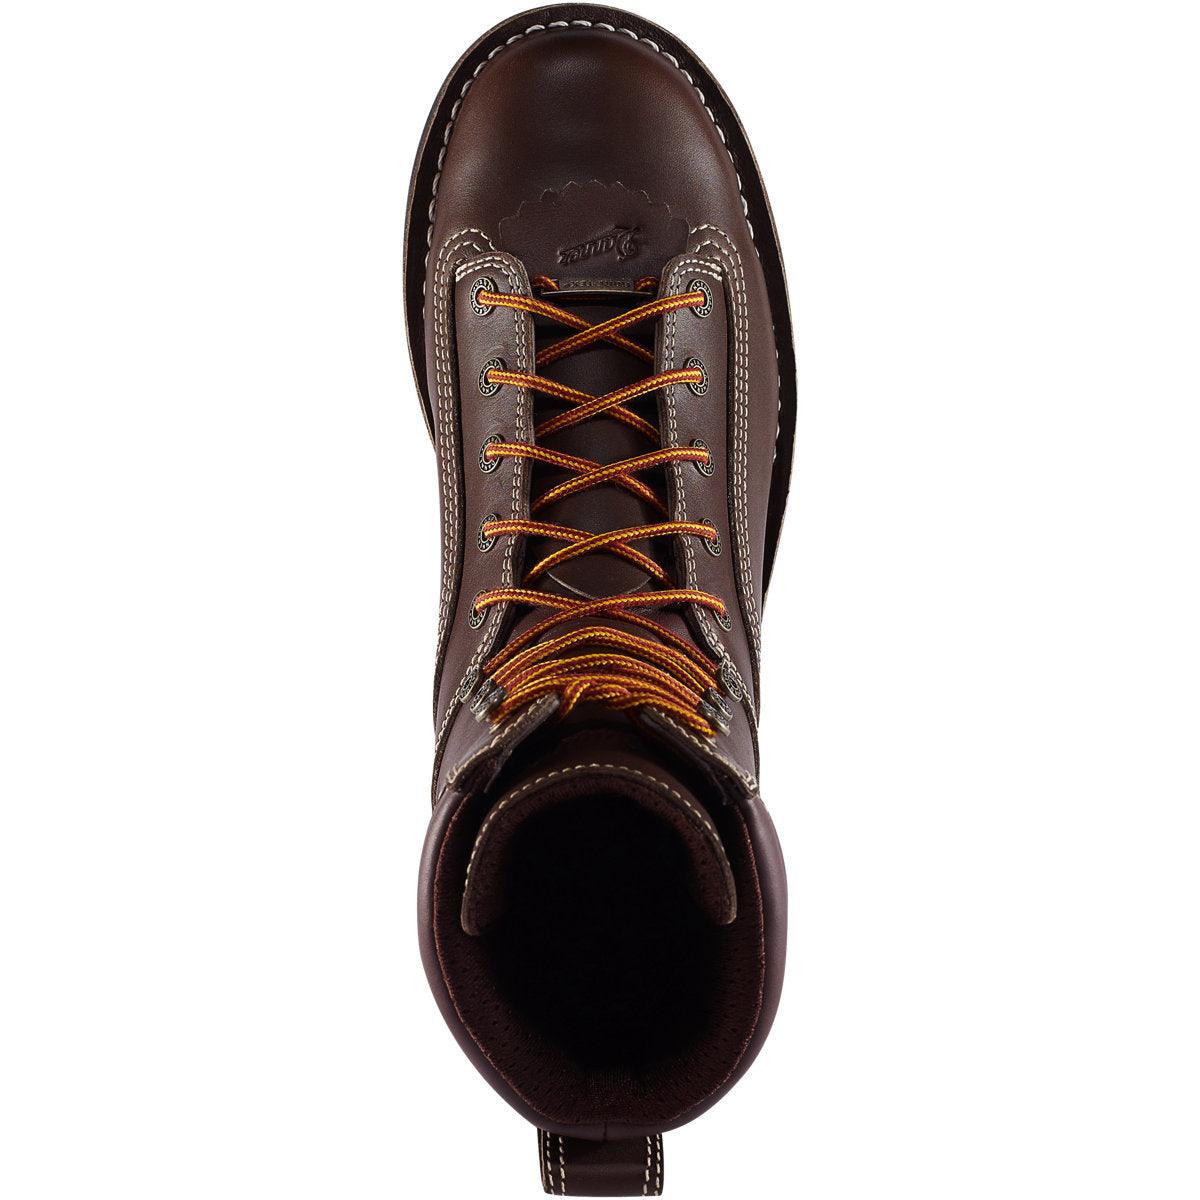 Men's Quarry USA - Alloy Toe - Brown - Purpose-Built / Home of the Trades